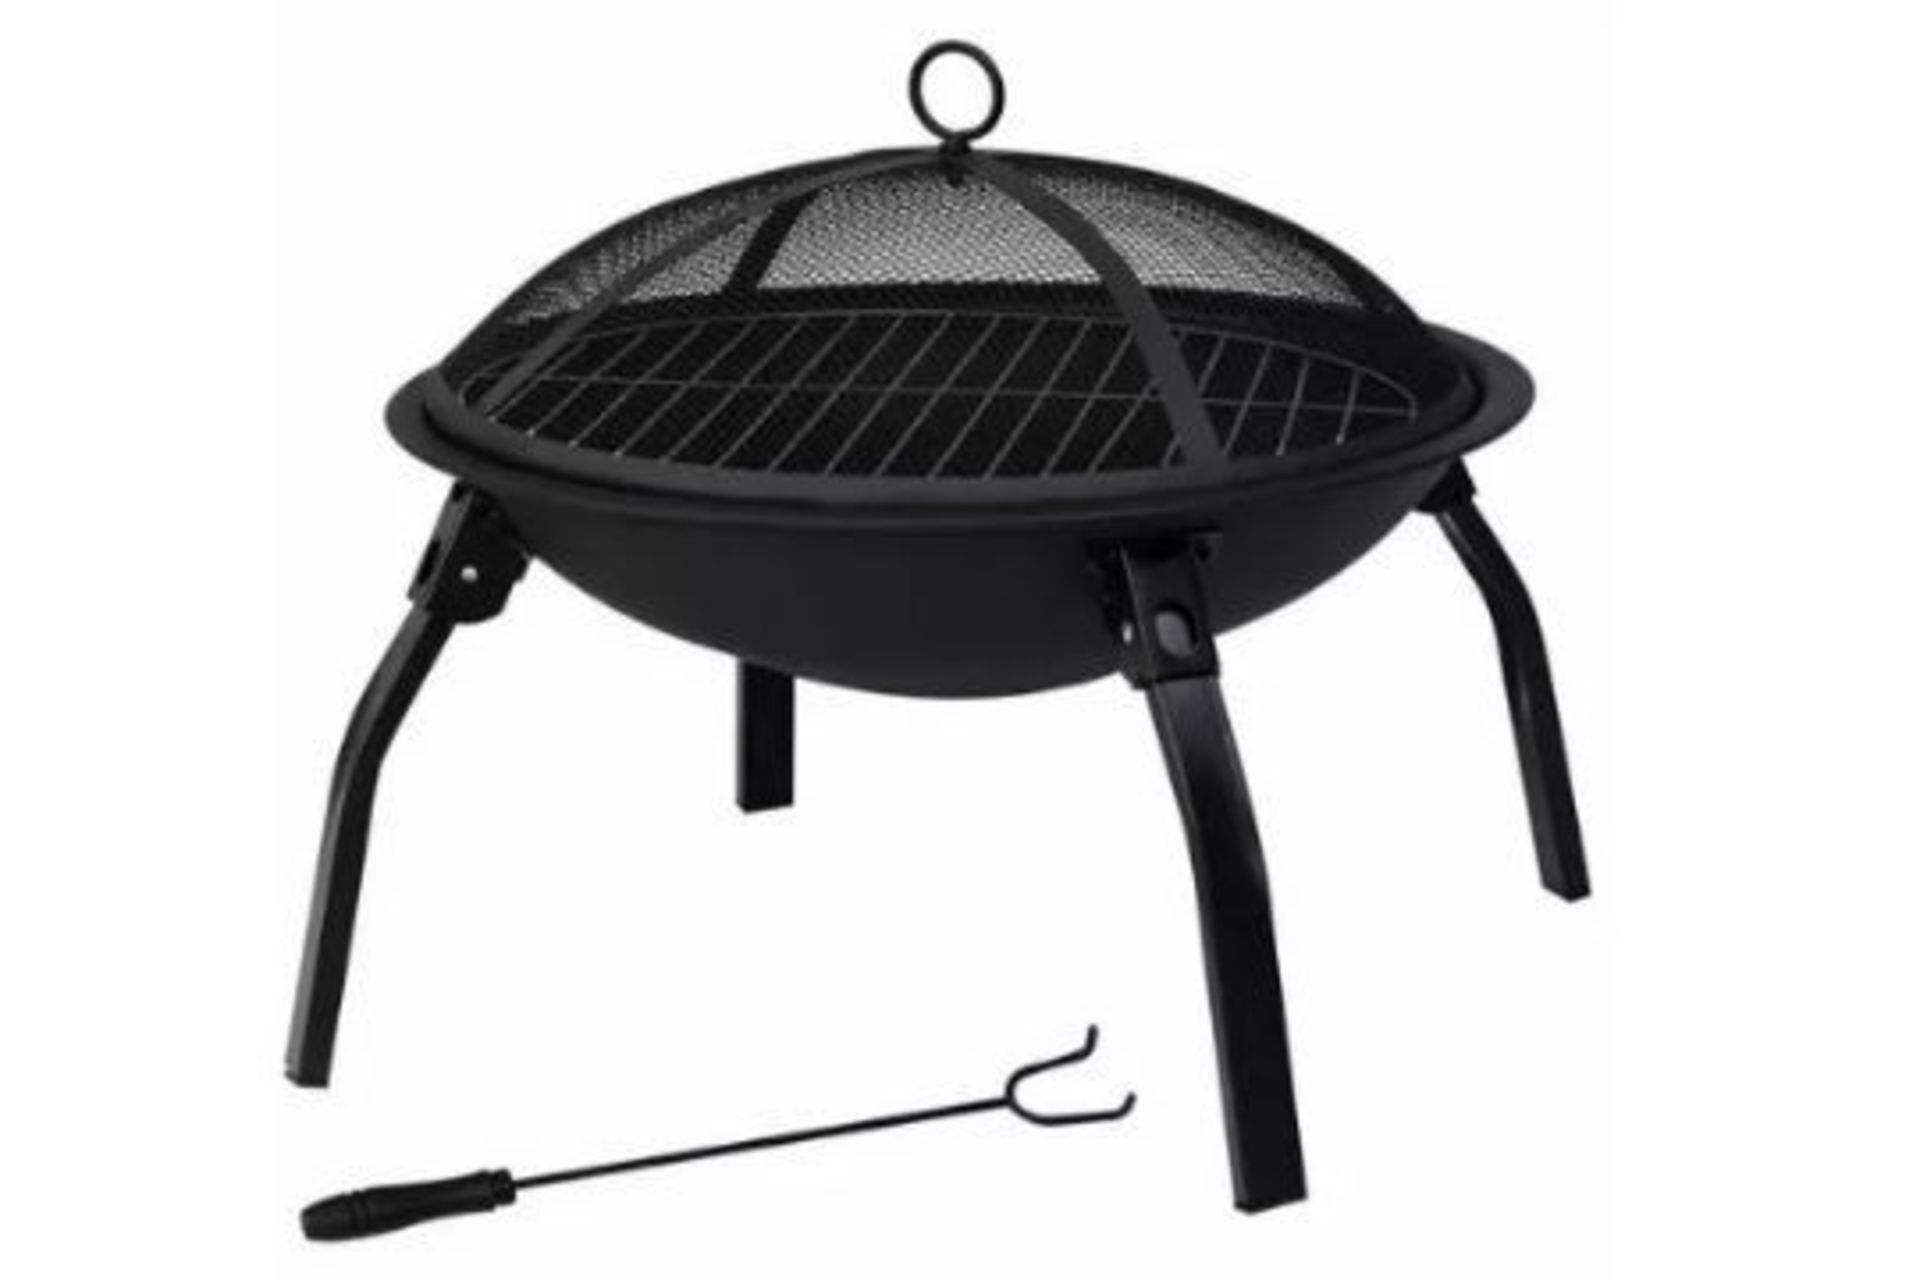 New Boxed Portable Folding Fire Pit BBQ 4 Leg Fire bowl Cooking Campfire. RRP £119.99. This - Image 2 of 2